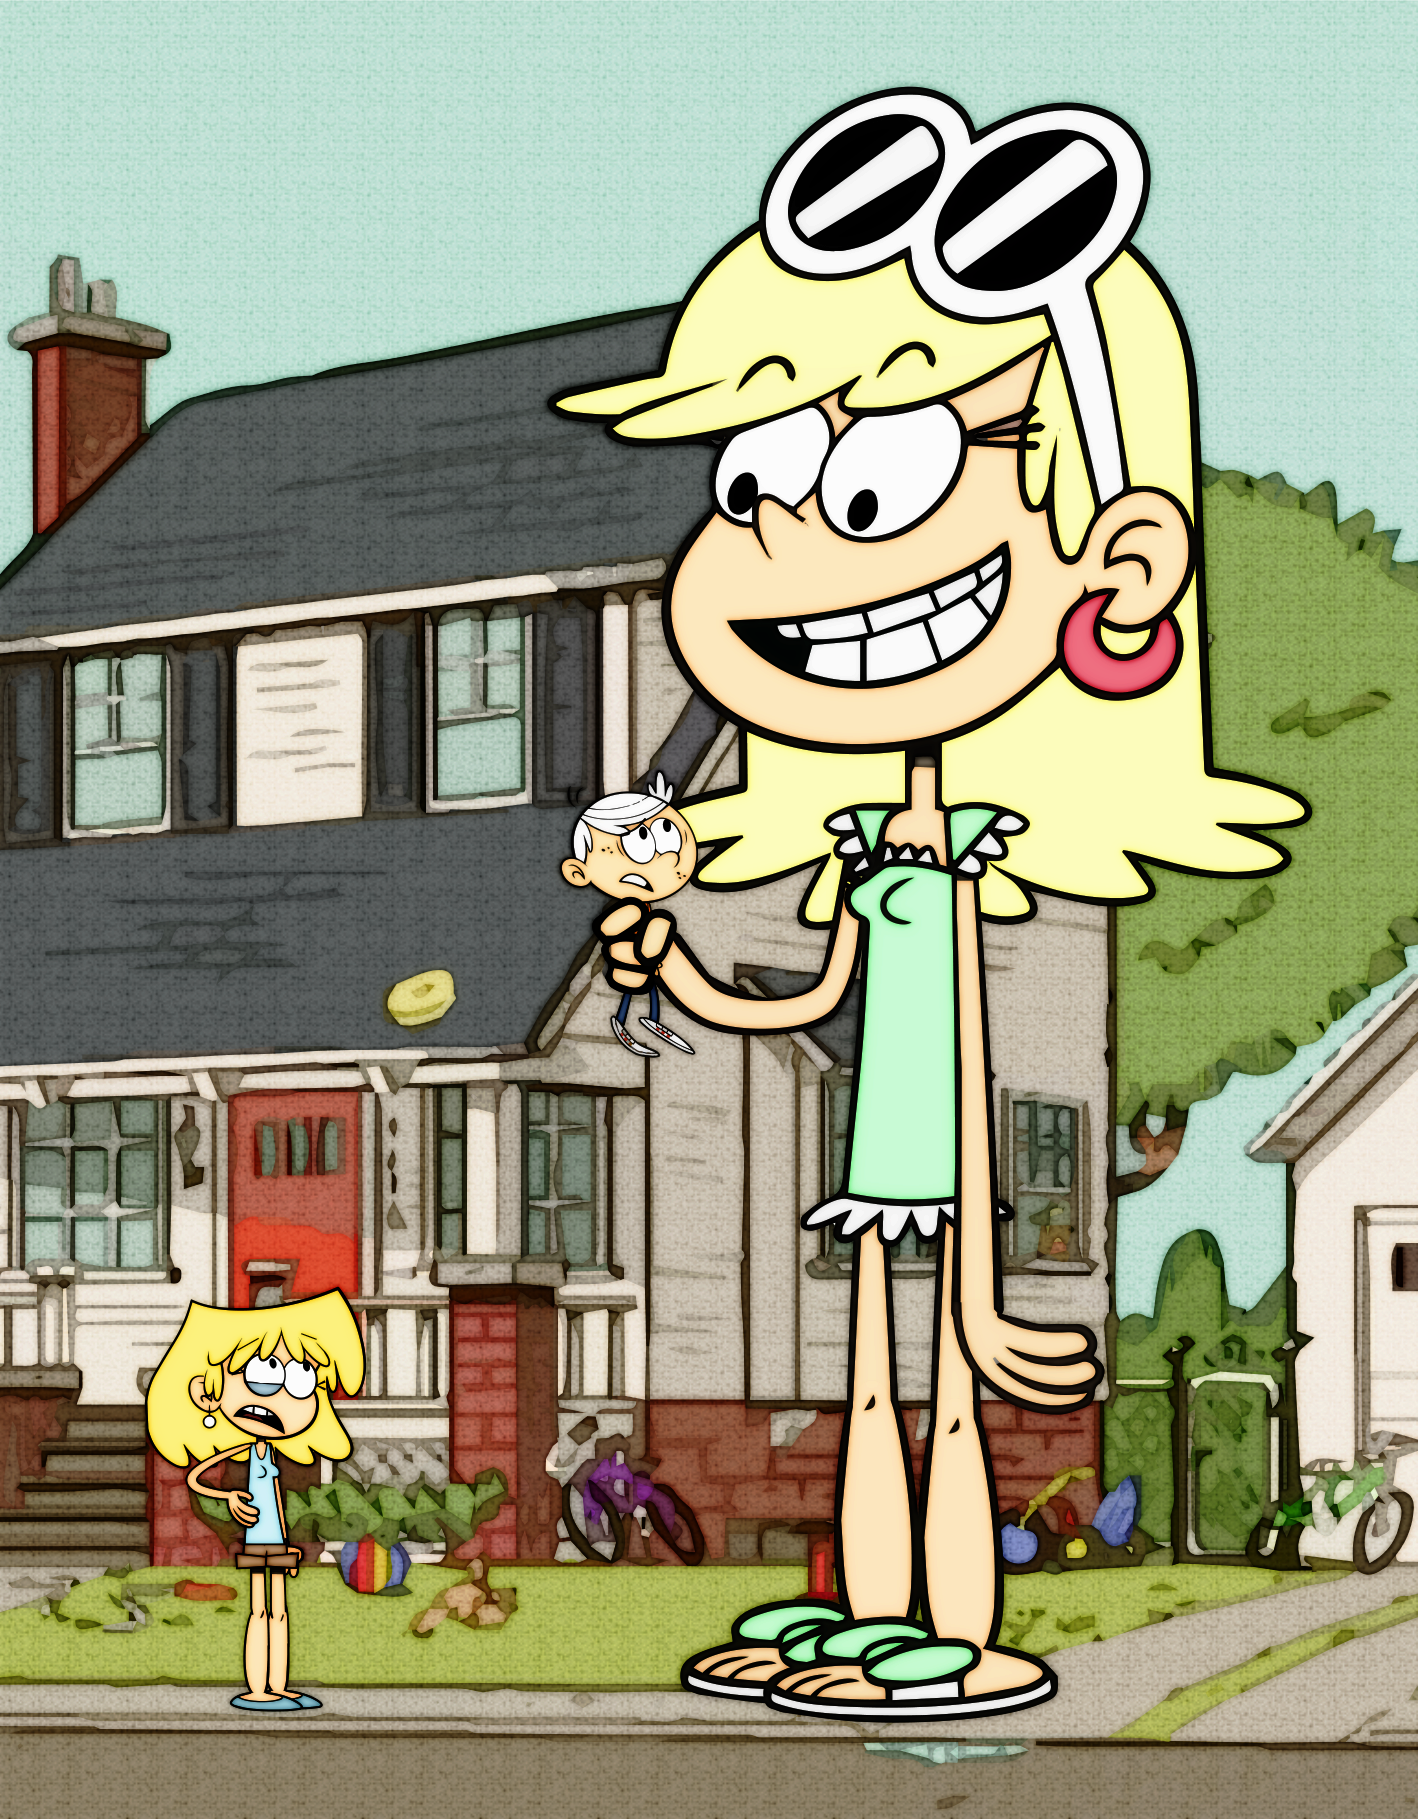 Gallery of The Loud House Ronnie Anne And Carlota.